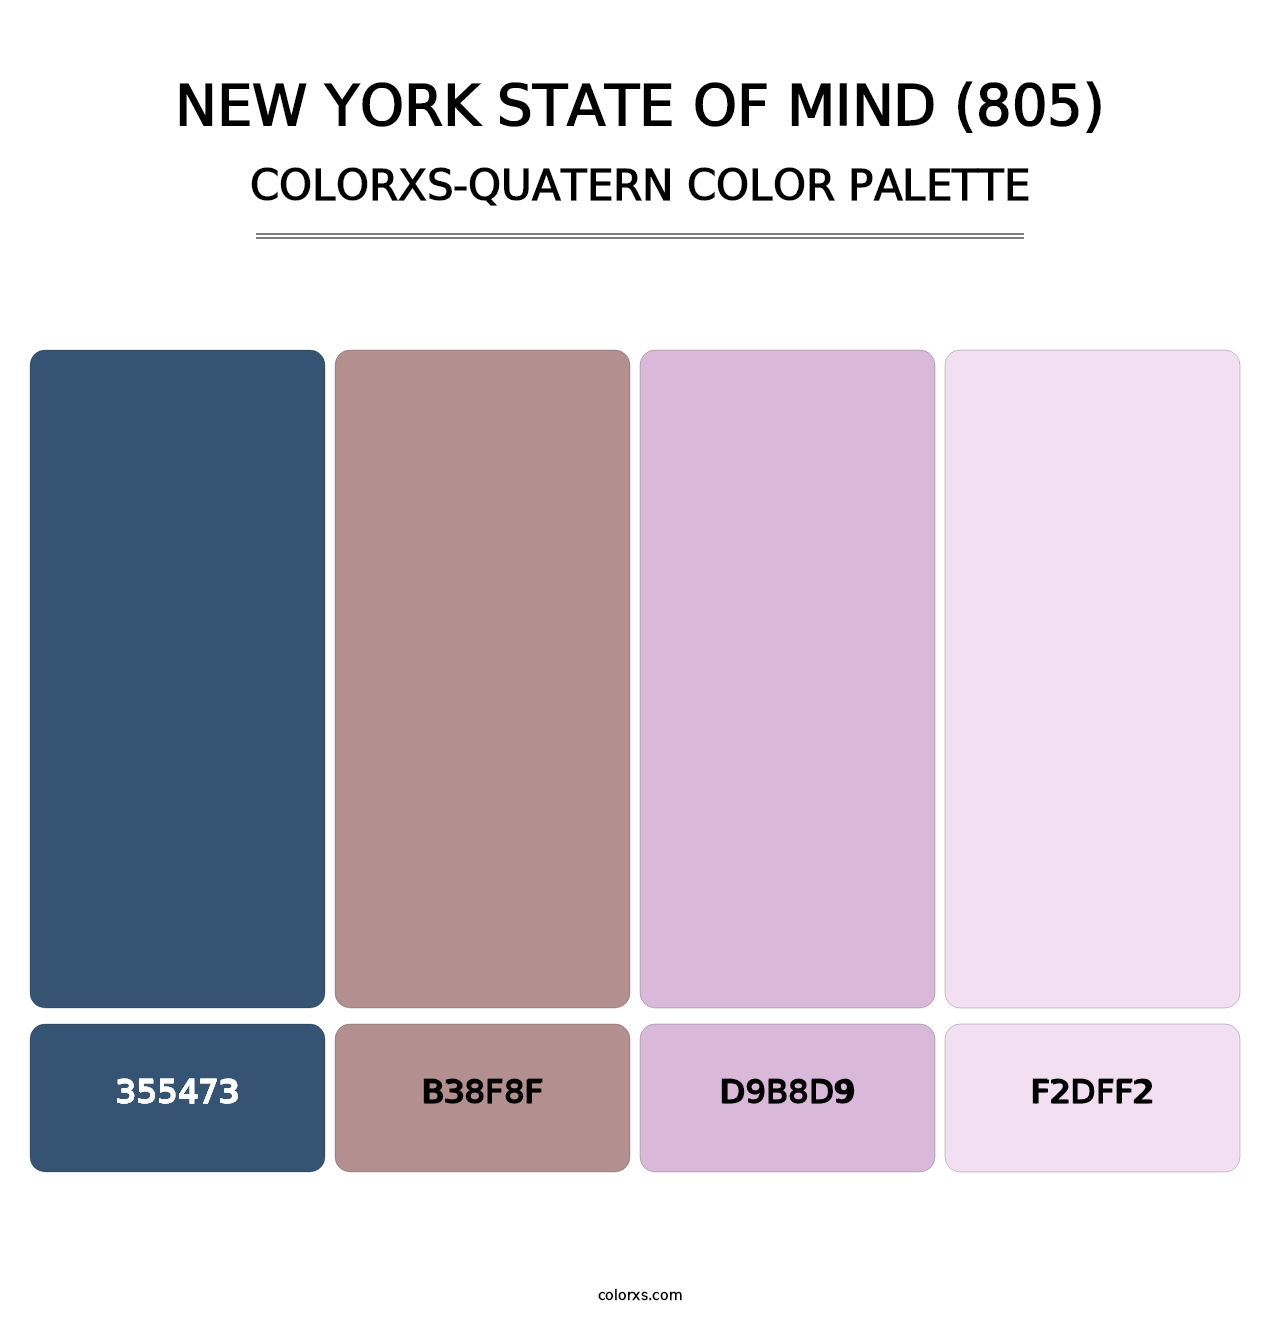 New York State of Mind (805) - Colorxs Quatern Palette